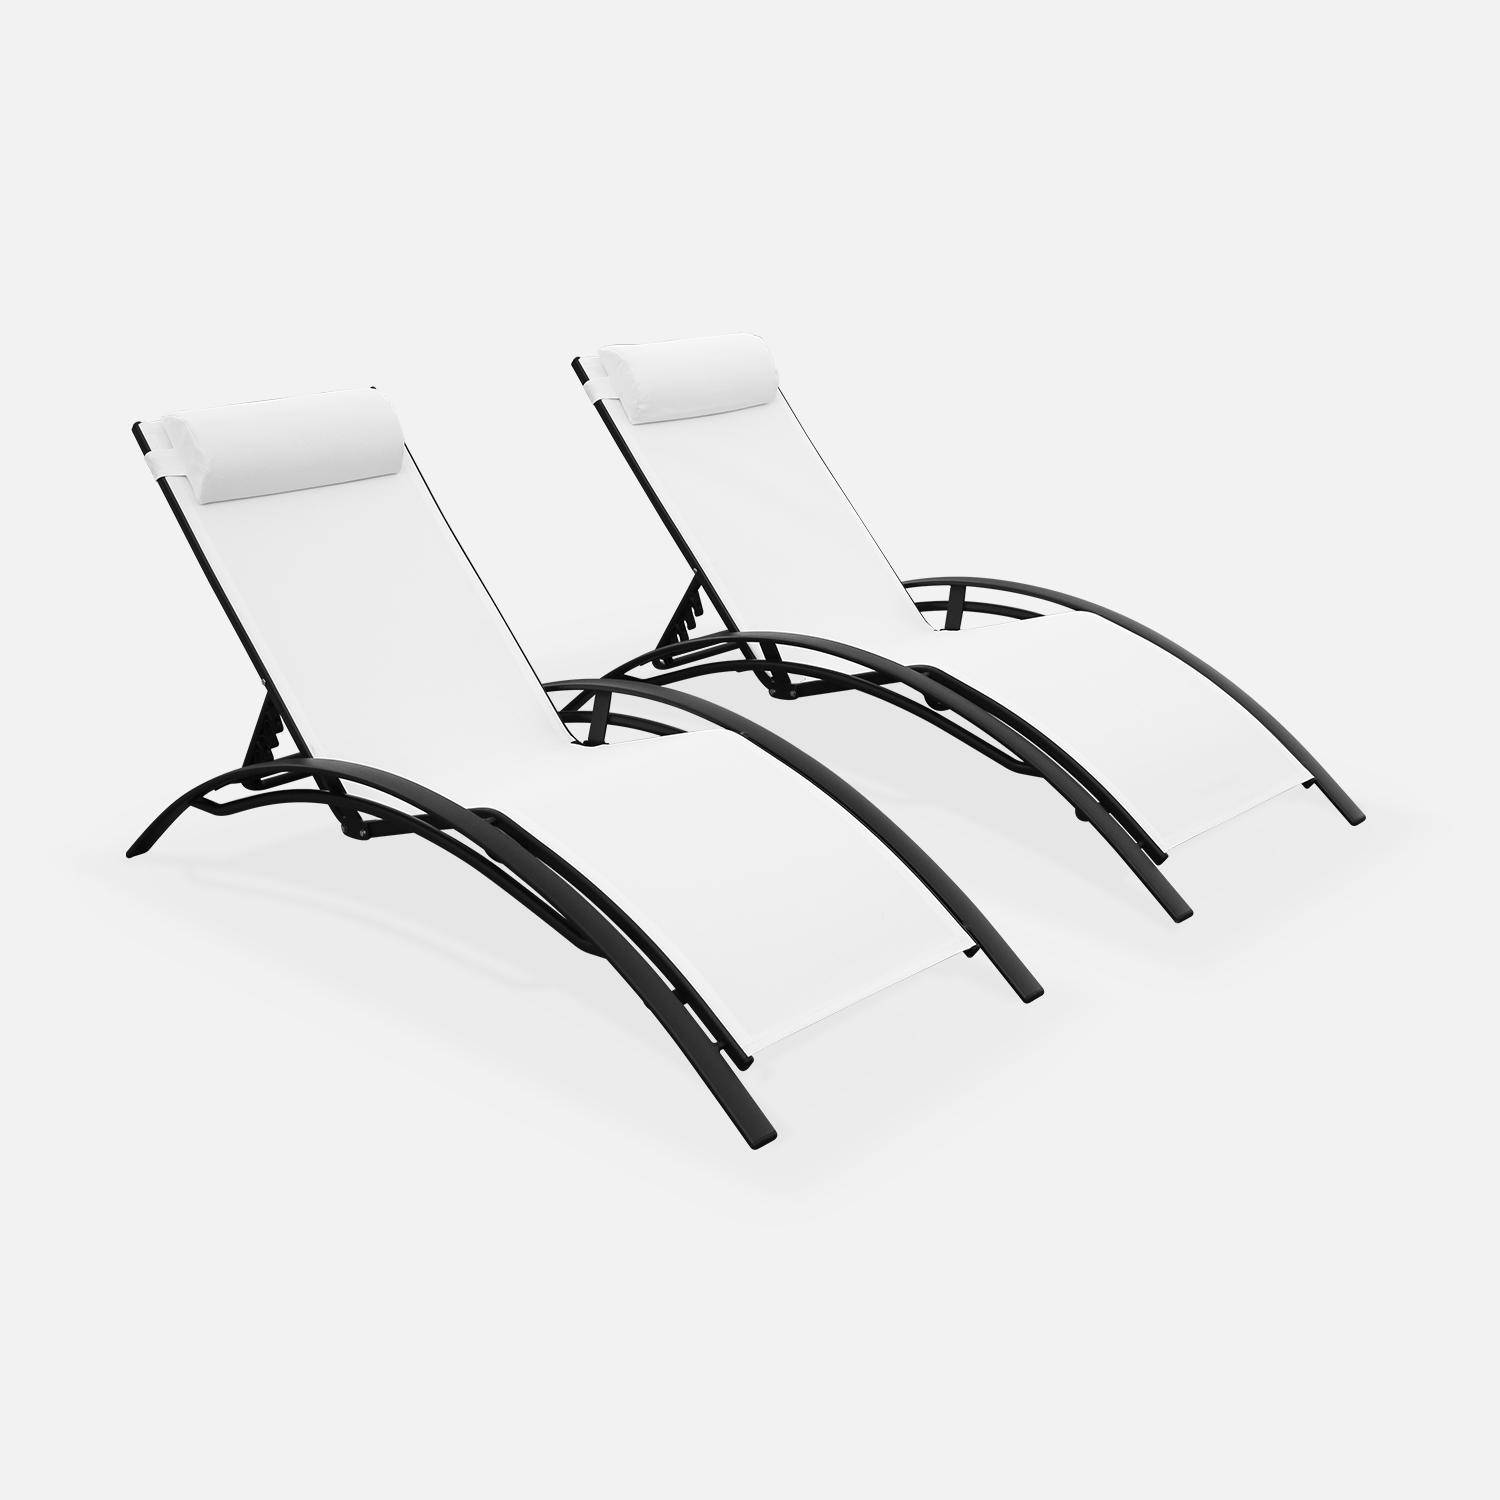 Pair of aluminium and textilene sun loungers, 4 reclining positions, headrest included, stackable - Louisa - Anthracite frame, White textilene Photo1